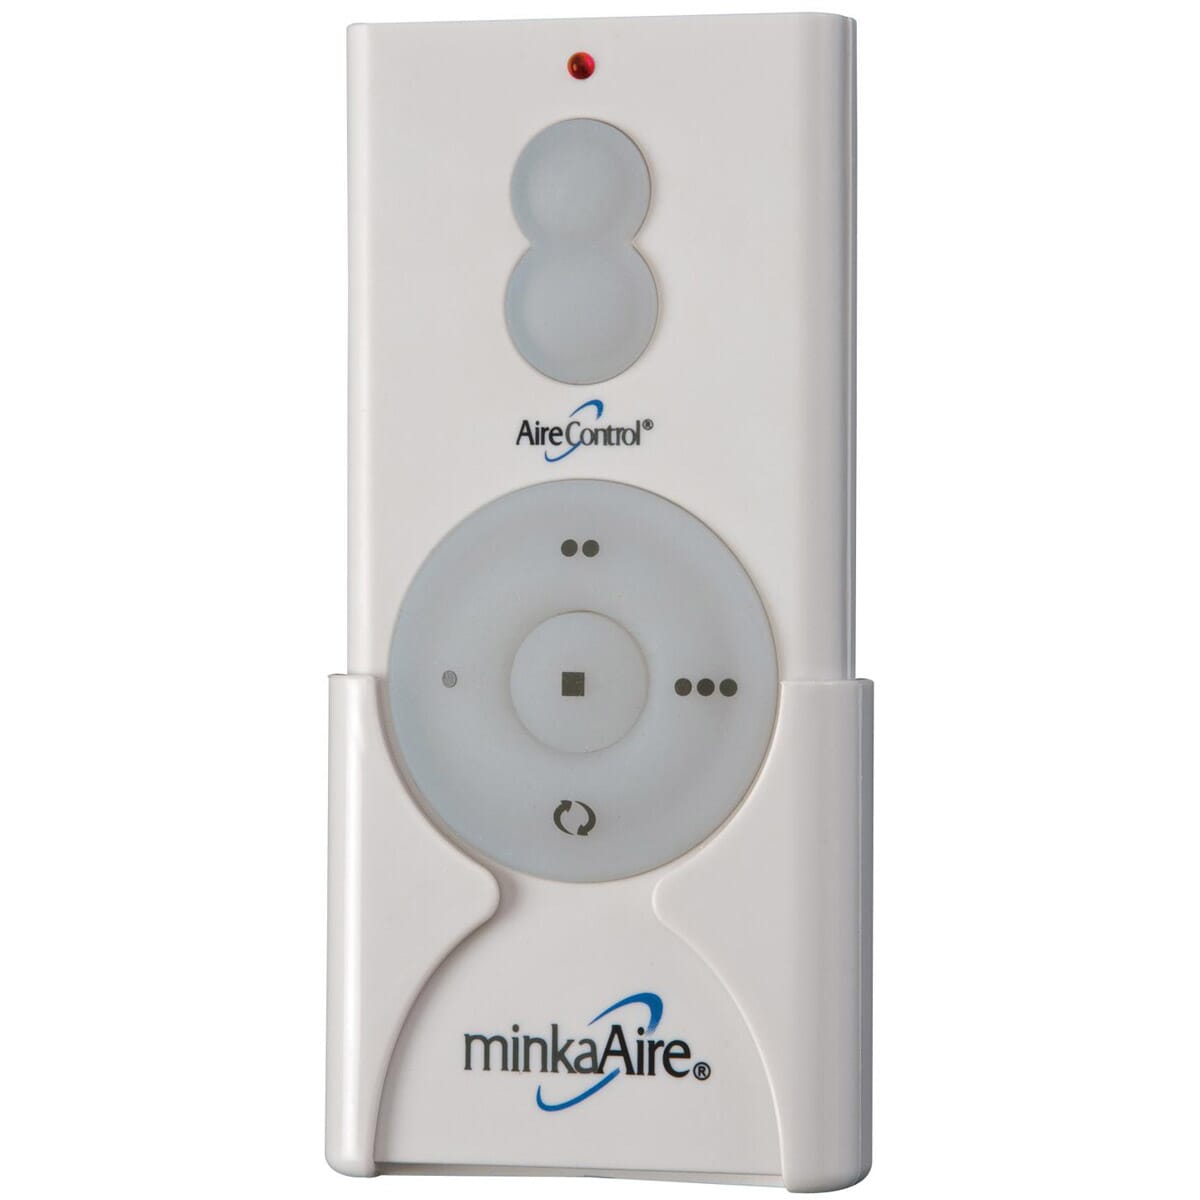 Ceiling Fan Remote DL-4111G-01 MinkaAire Aire Control Remote Only 